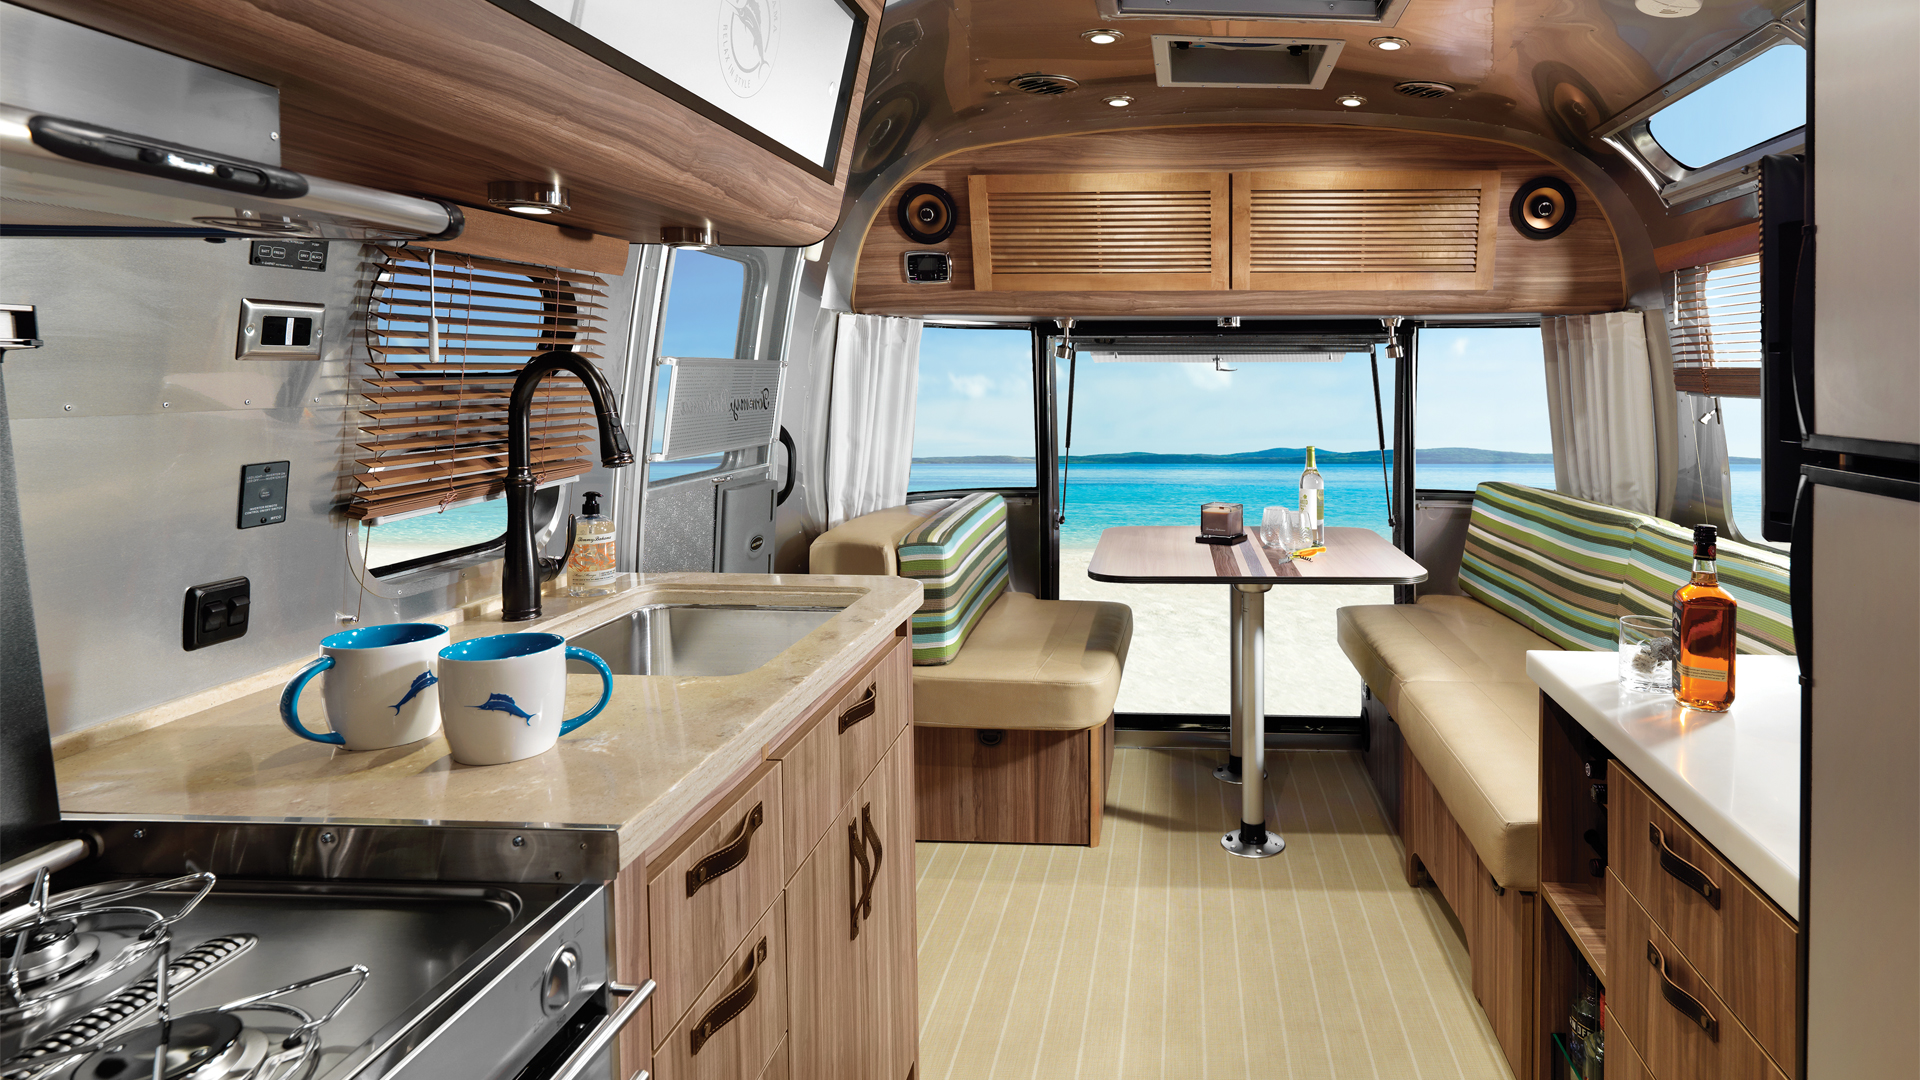 Interior of the Airstream Tommy Bahama Travel Trailer